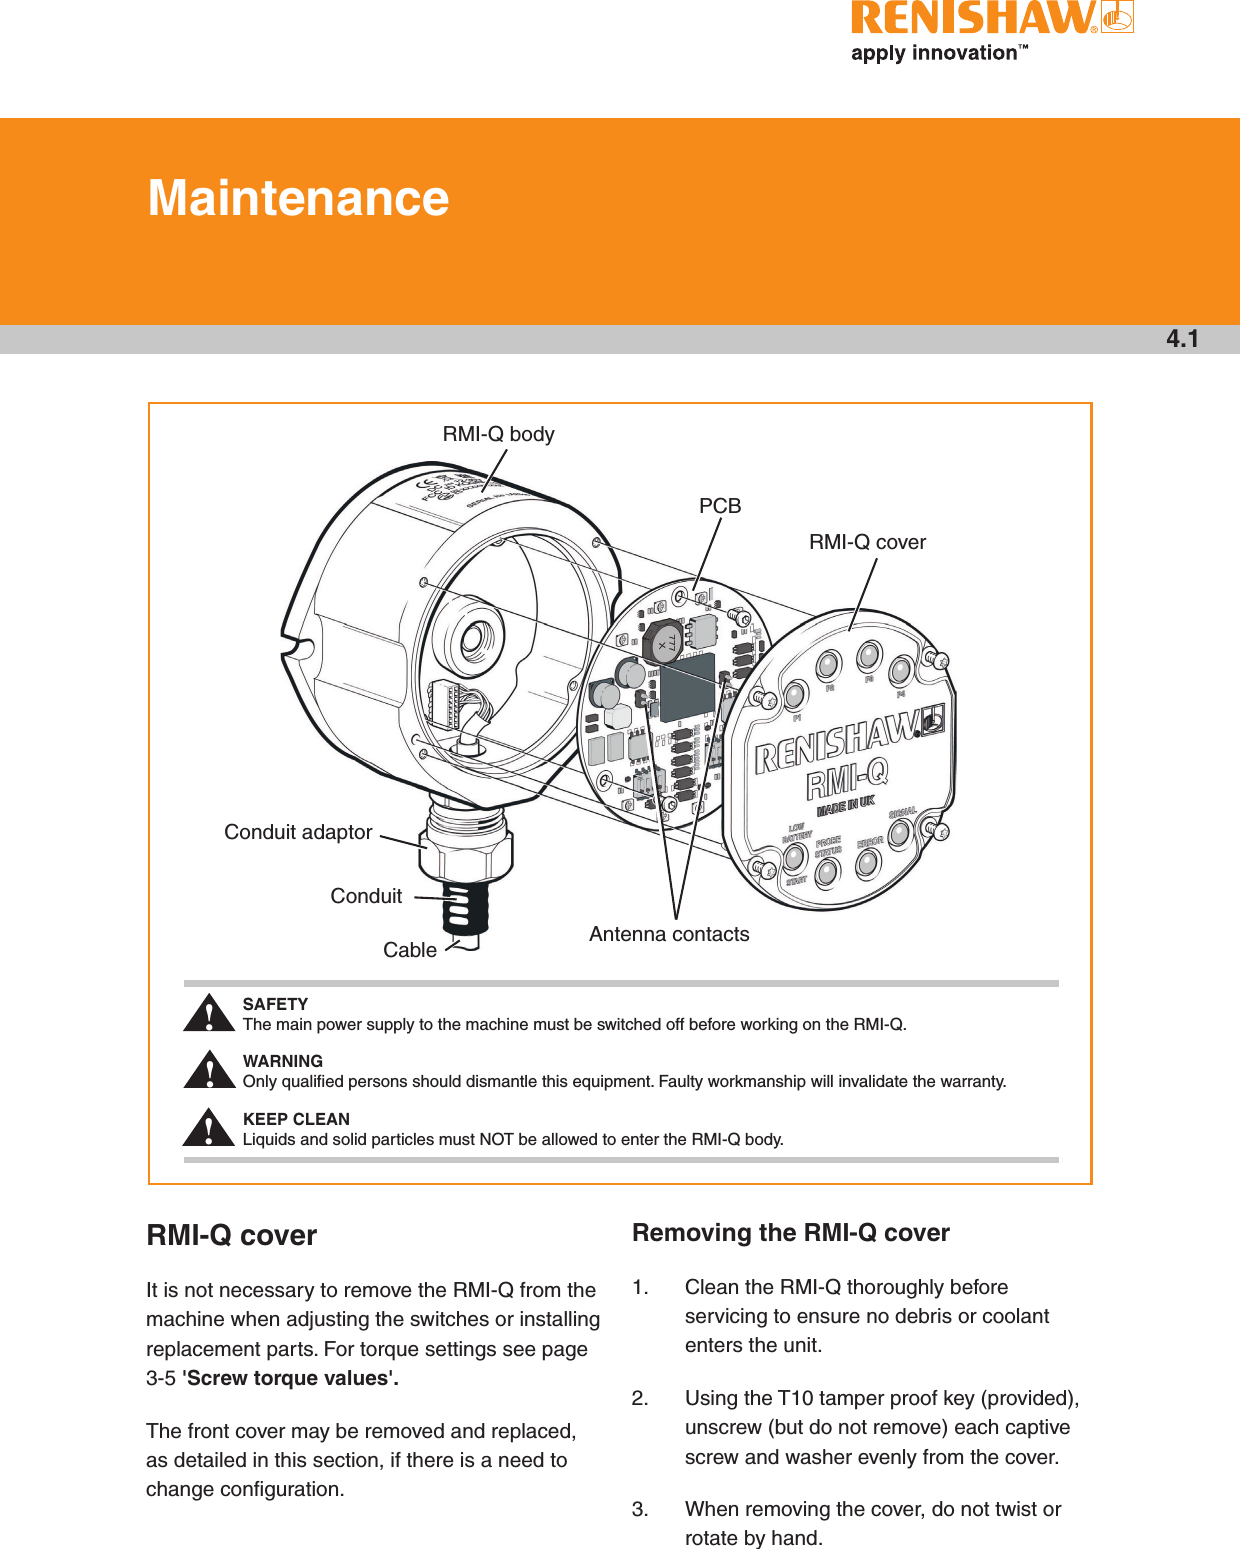 4.1MaintenanceRMI-Q coverIt is not necessary to remove the RMI-Q from the machine when adjusting the switches or installing replacement parts. For torque settings see page 3-5 &apos;Screw torque values&apos;.The front cover may be removed and replaced, as detailed in this section, if there is a need to change configuration.Removing the RMI-Q cover1.  Clean the RMI-Q thoroughly before servicing to ensure no debris or coolant enters the unit.2.  Using the T10 tamper proof key (provided), unscrew (but do not remove) each captive screw and washer evenly from the cover.3.  When removing the cover, do not twist or rotate by hand.RMI-Q bodyPCBRMI-Q coverConduit adaptorConduitCable Antenna contactsSAFETY The main power supply to the machine must be switched off before working on the RMI-Q. WARNING Only qualiﬁed persons should dismantle this equipment. Faulty workmanship will invalidate the warranty. KEEP CLEAN  Liquids and solid particles must NOT be allowed to enter the RMI-Q body.!!!